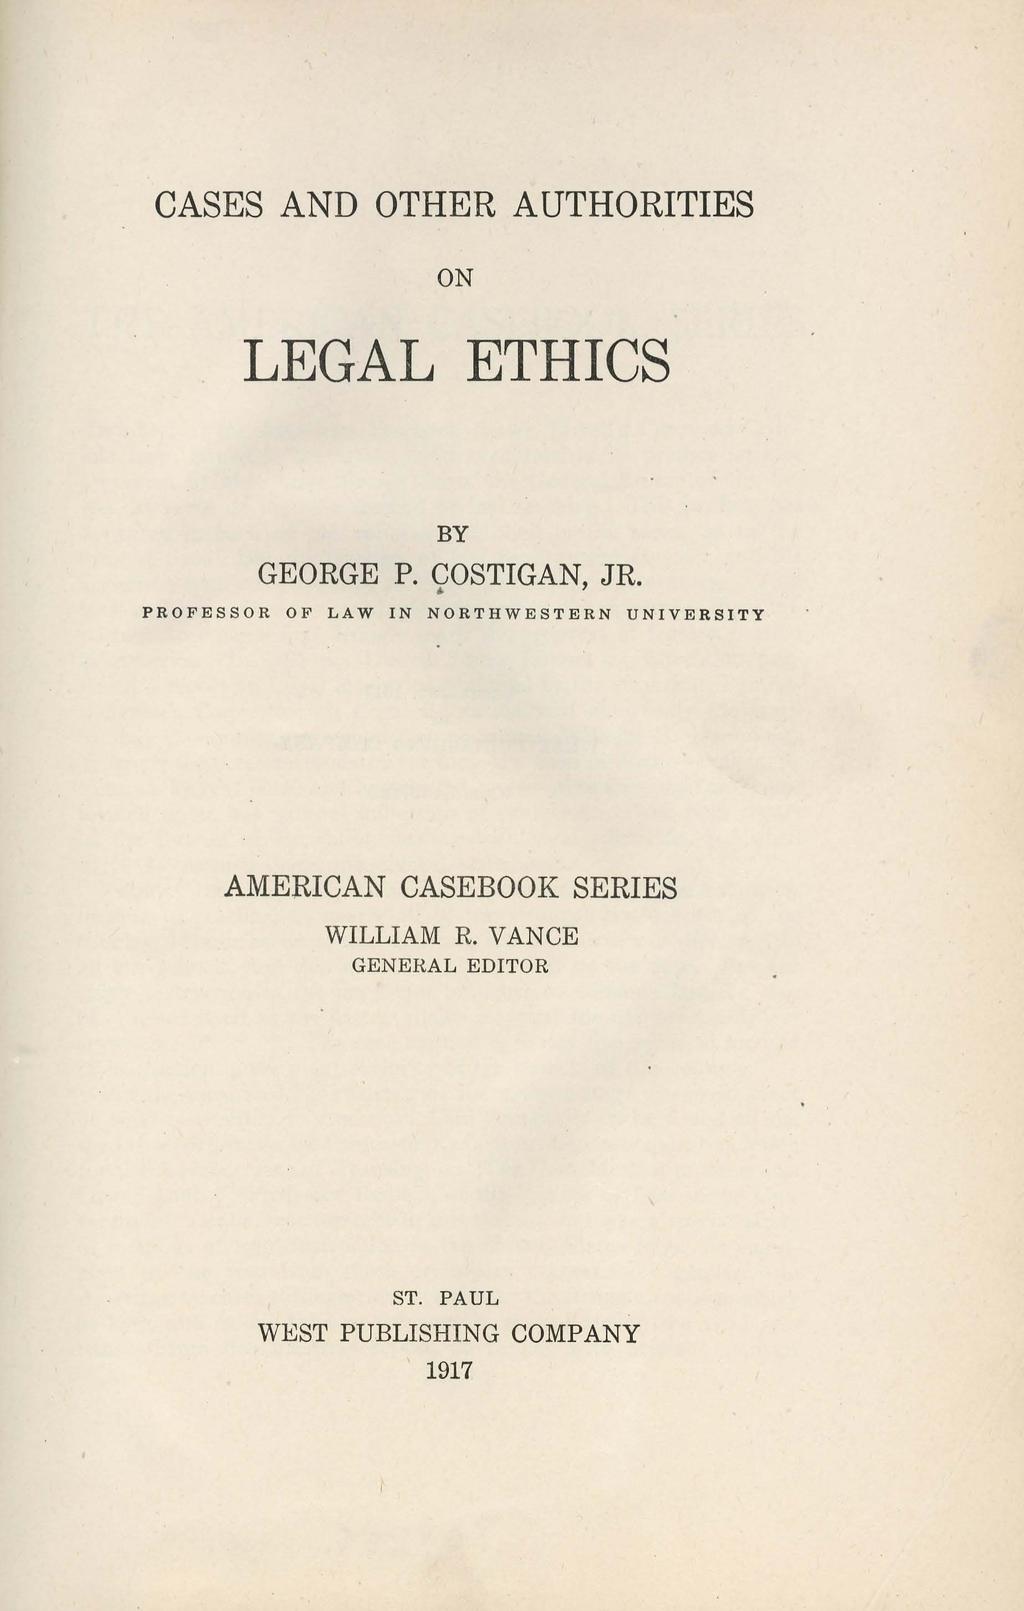 CASES AND OTHER AUTHORITIES ON LEGAL ETHICS BY GEORGE P. COSTIGAN, JR.